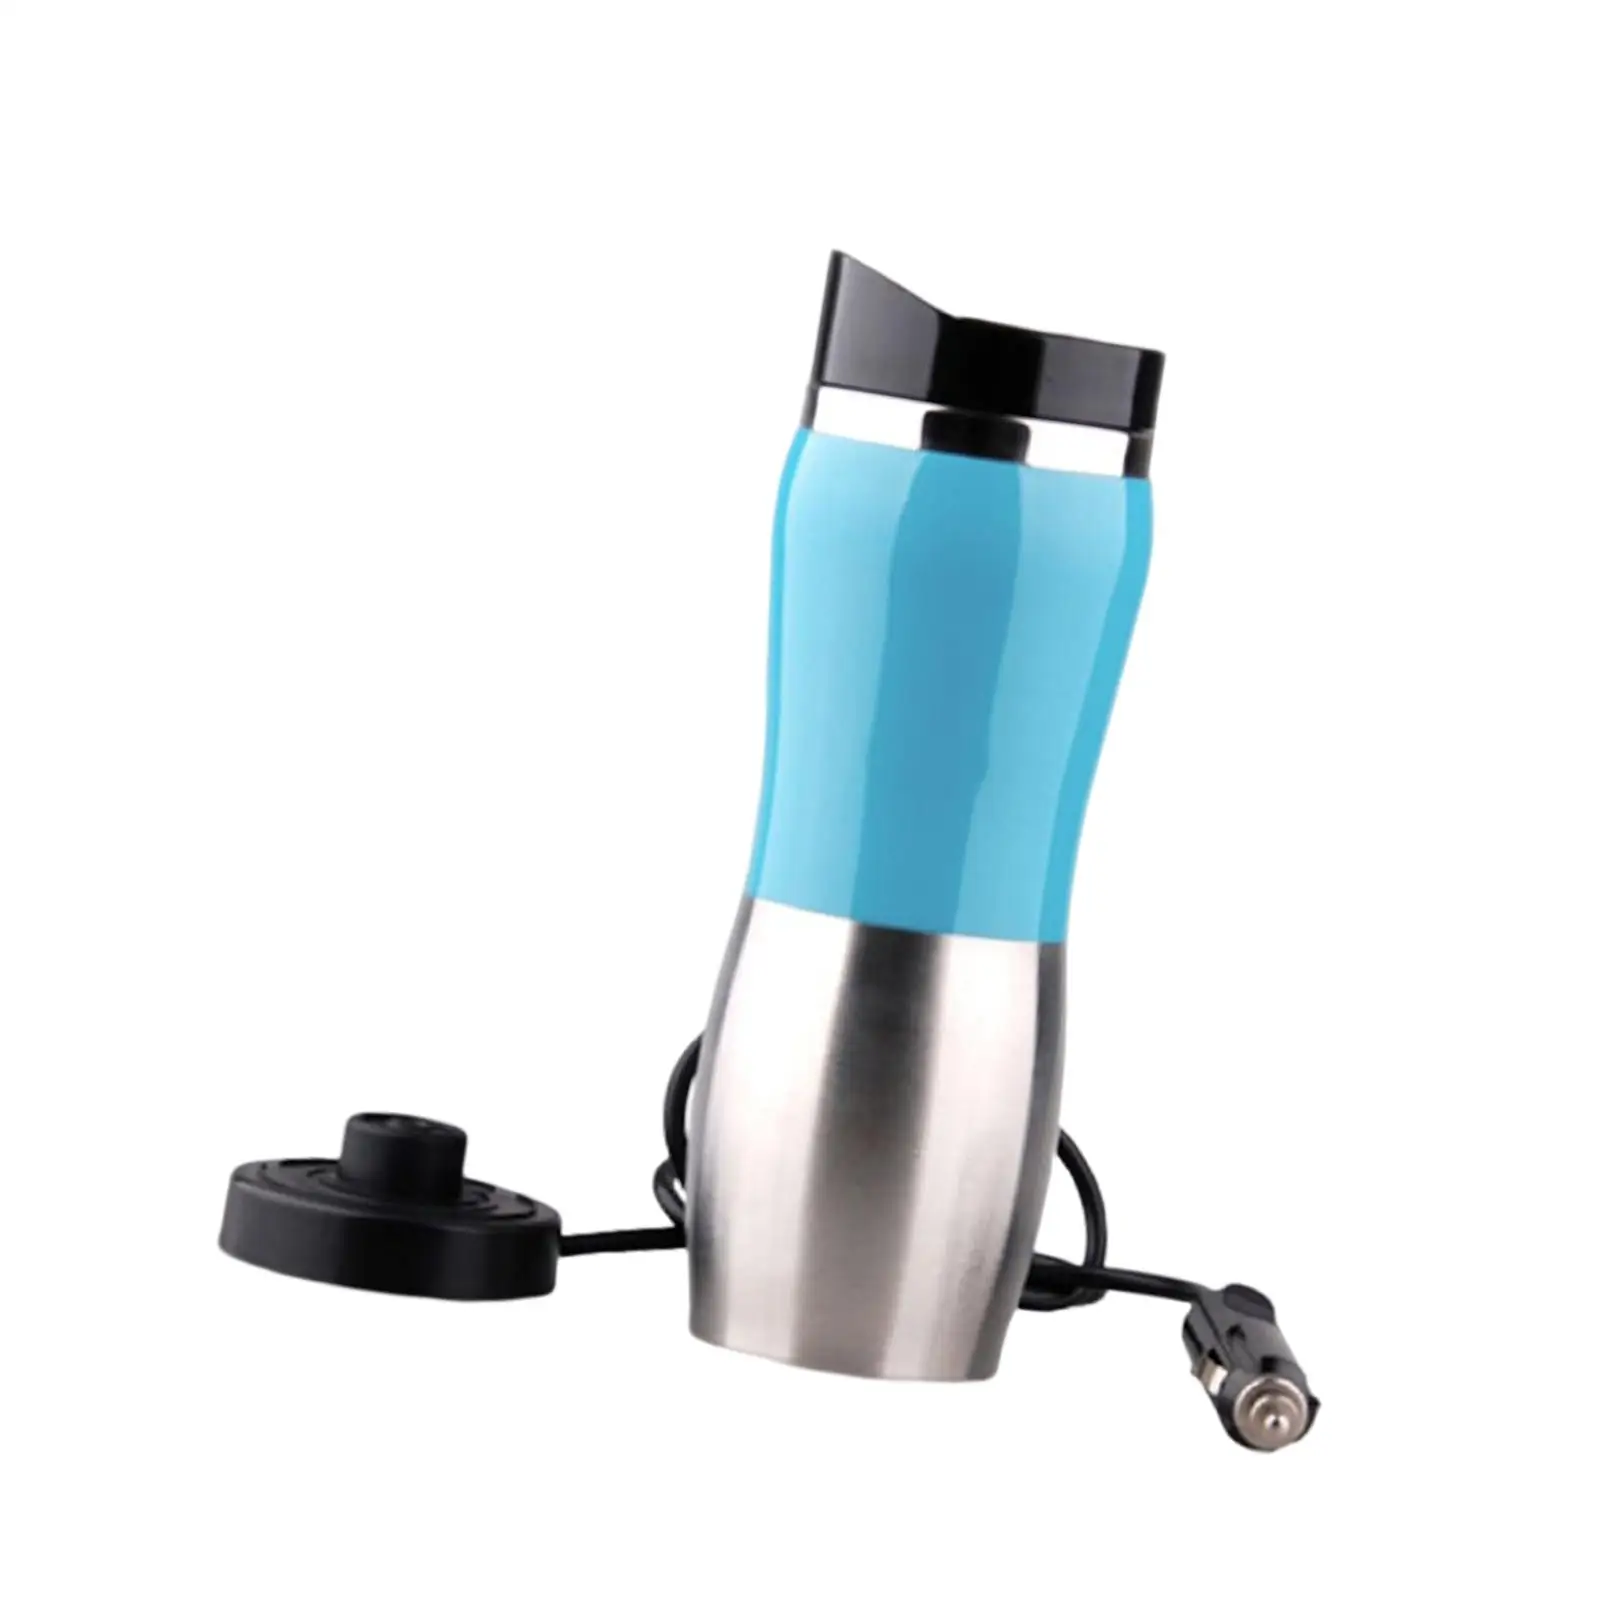  Kettle, 24V, 400ml, Stainless Steel, Travel, Heating Cup, Auto Heating Bottle Mug for Tea  Making Camping Boat Travel